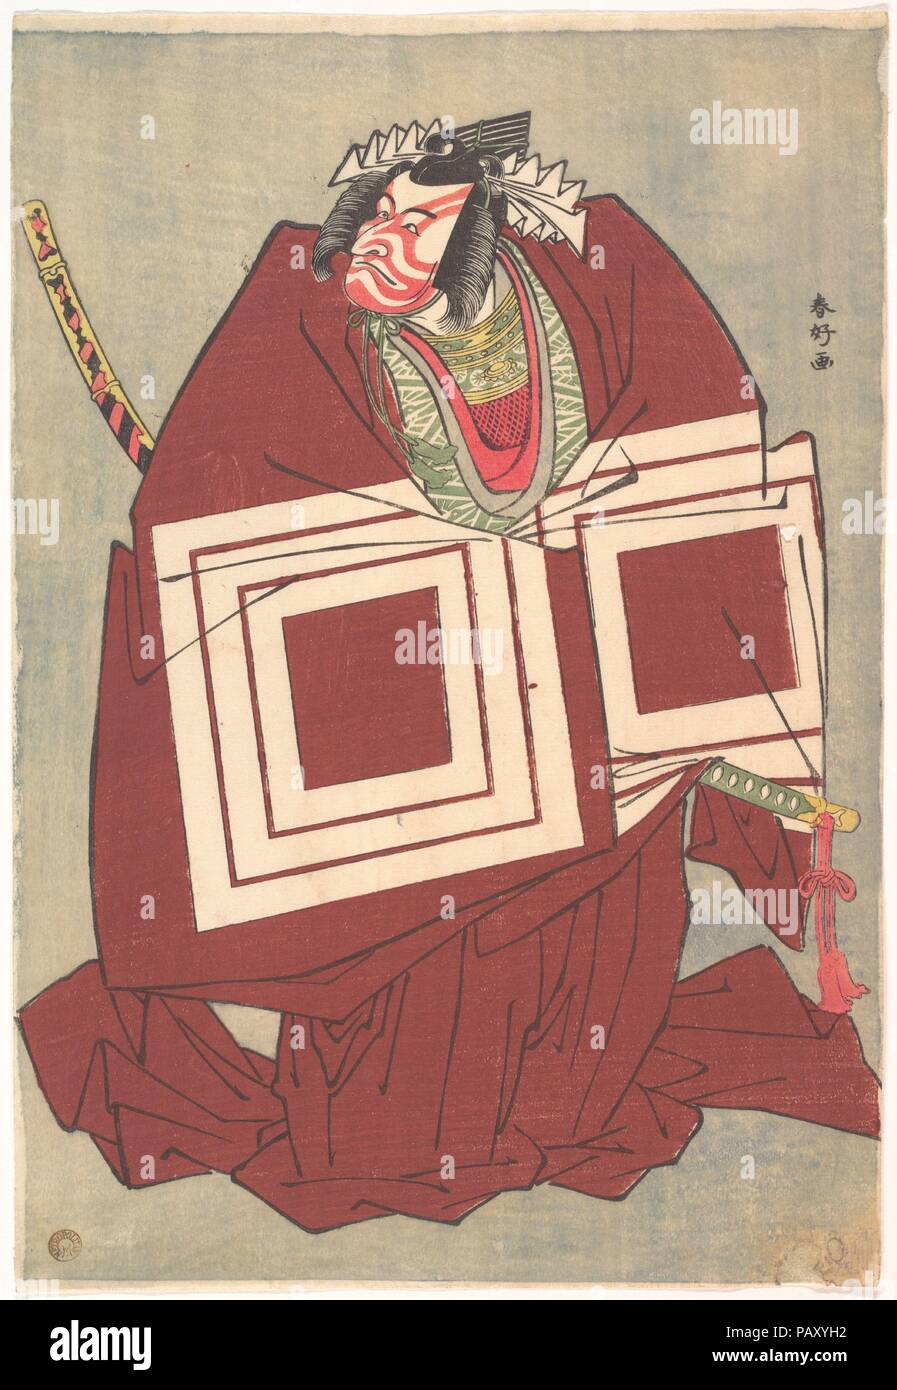 Ichikawa Danjuro V in a Shibaraku Performance. Artist: Katsukawa Shunko (Japanese, 1743-1812). Culture: Japan. Dimensions: H. 12 7/8 in. (32.7 cm); W. 8 5/8 in. (21.9 cm). Date: ca. 1789.  The Ichikawa family was renowned for playing heroic 'Shibaraku!' roles. Shown here in such a performance, Danjuro wears a persimmon red robe with a huge family crest of three nested squares (mimasu) on each of his large sleeves. His face shows red lines on white makeup, and he wears a bizarre wig. Shunko portrayed Danjuro V striking a pose (mie) at a climactic moment to make a powerful impression on the audi Stock Photo